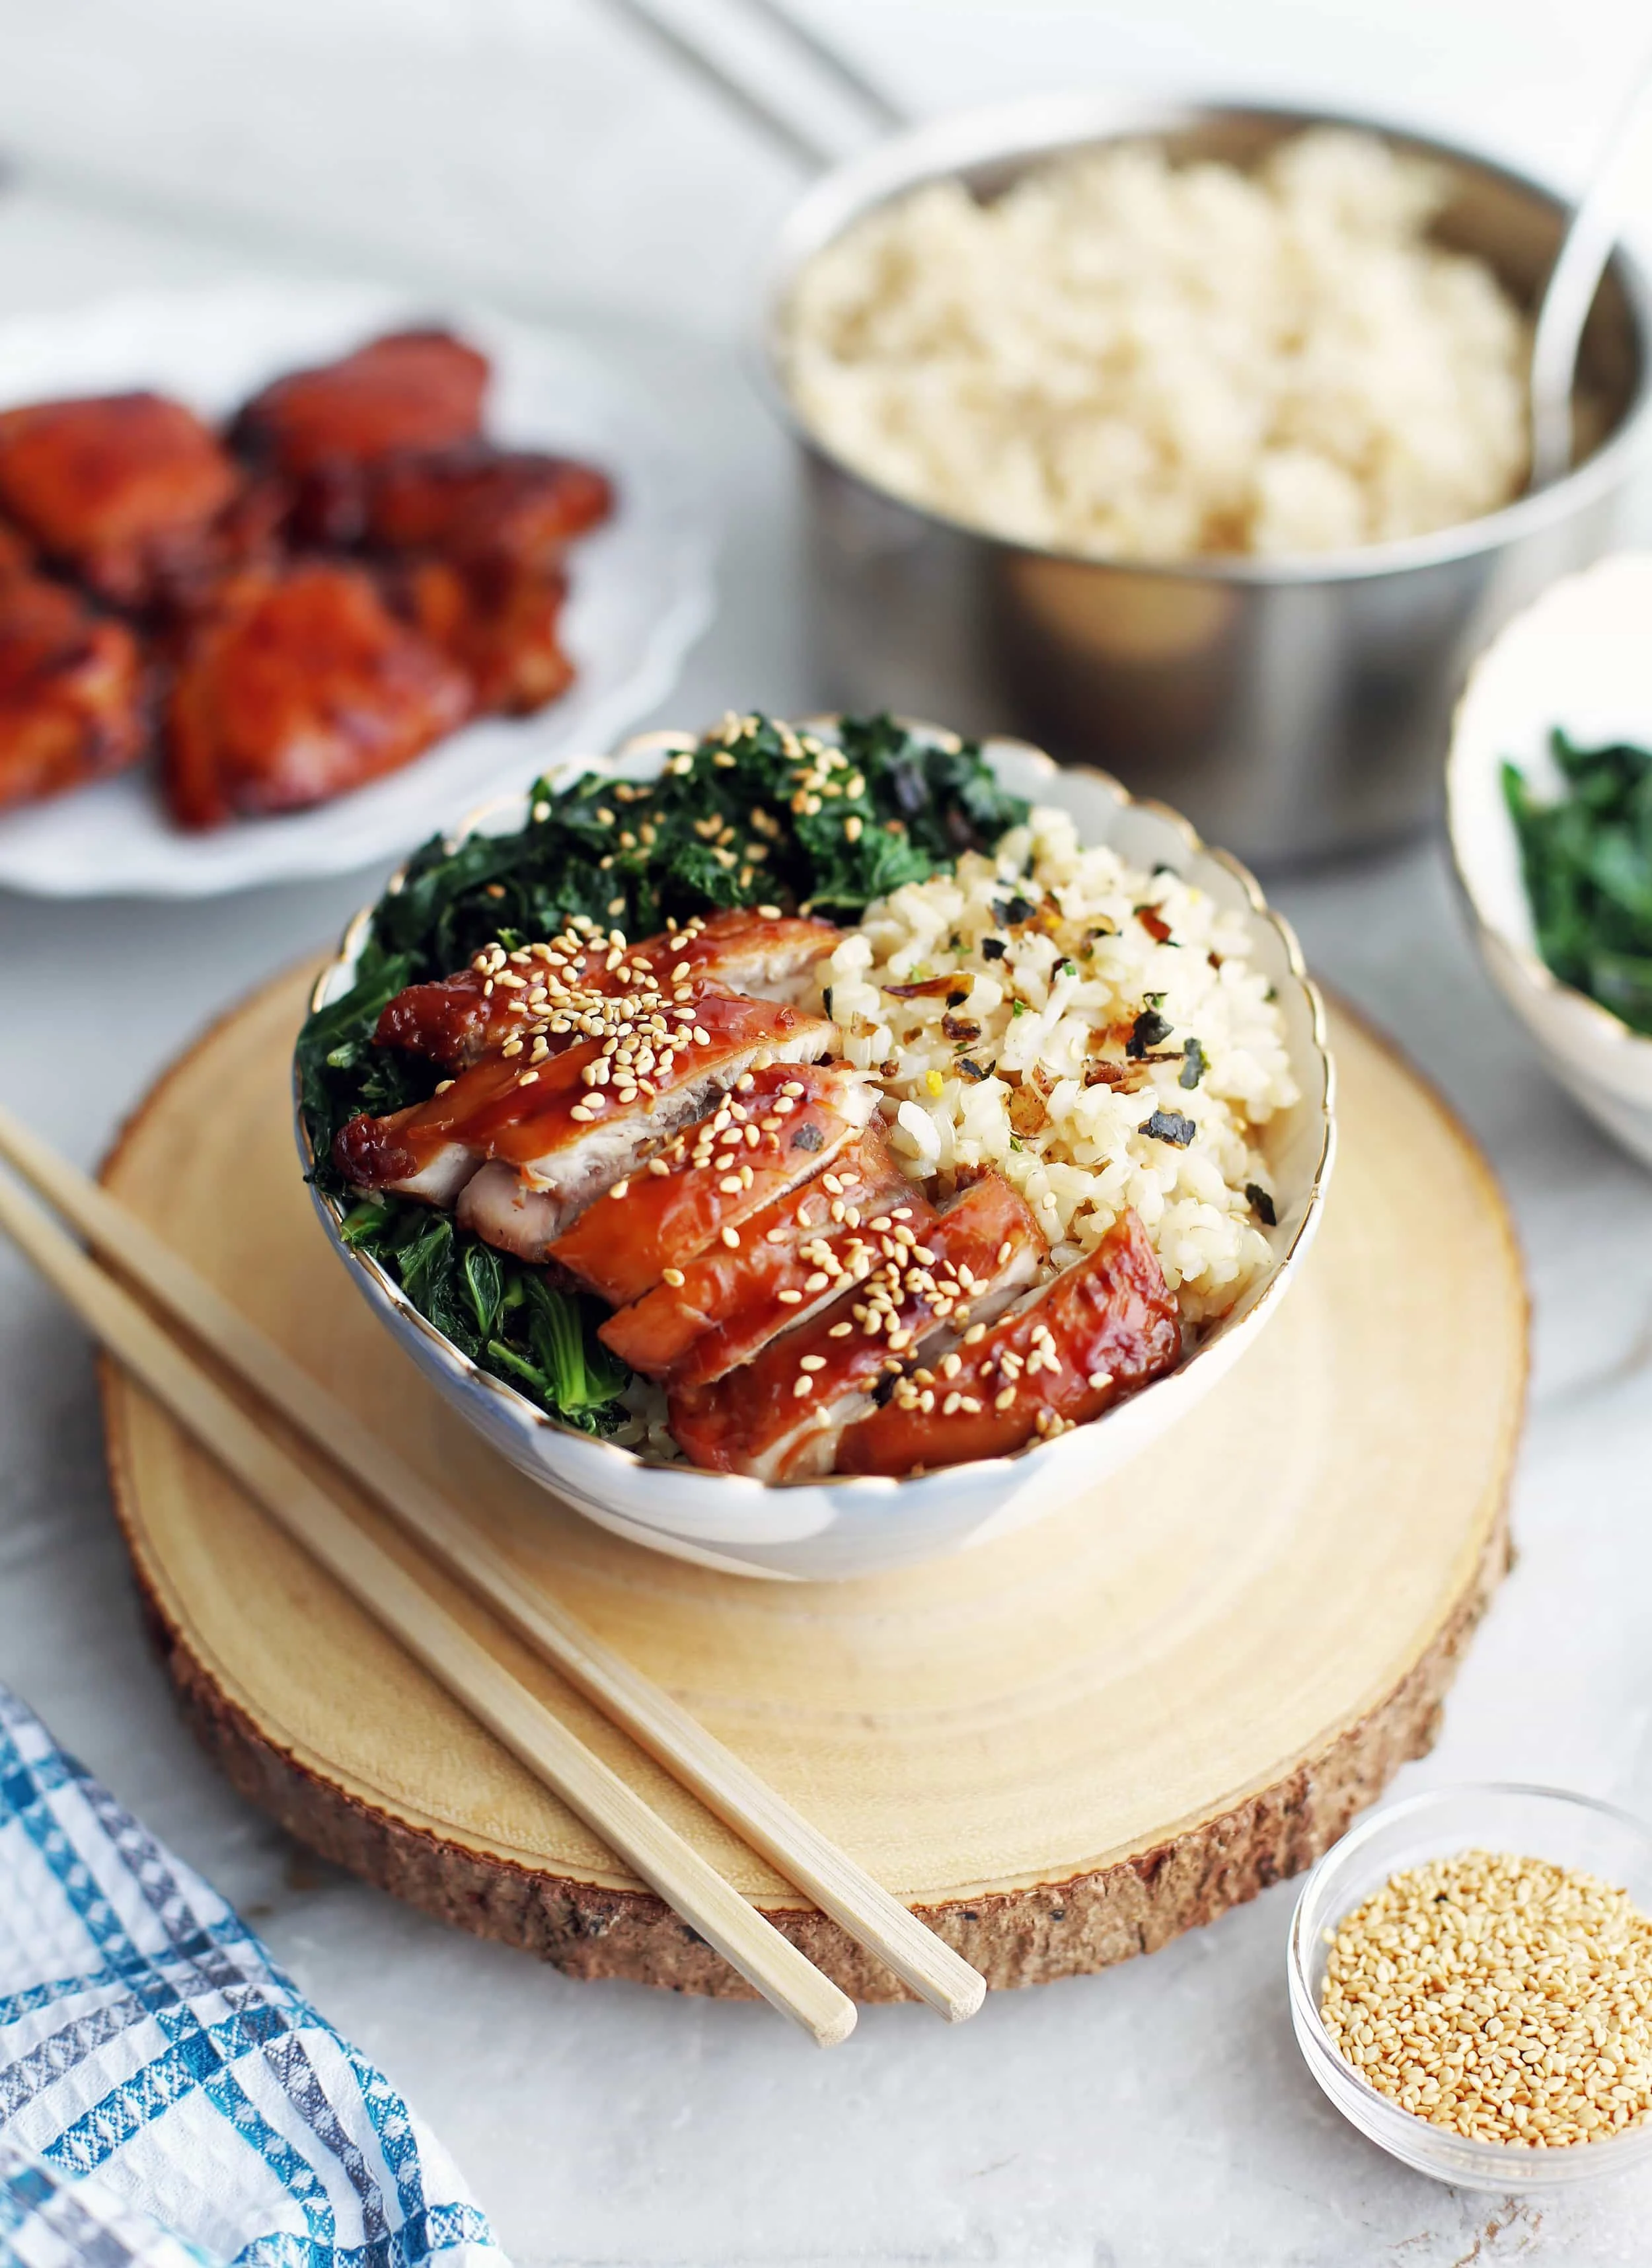 Side view of a bowl of teriyaki chicken with green sauteed kale, and brown rice.